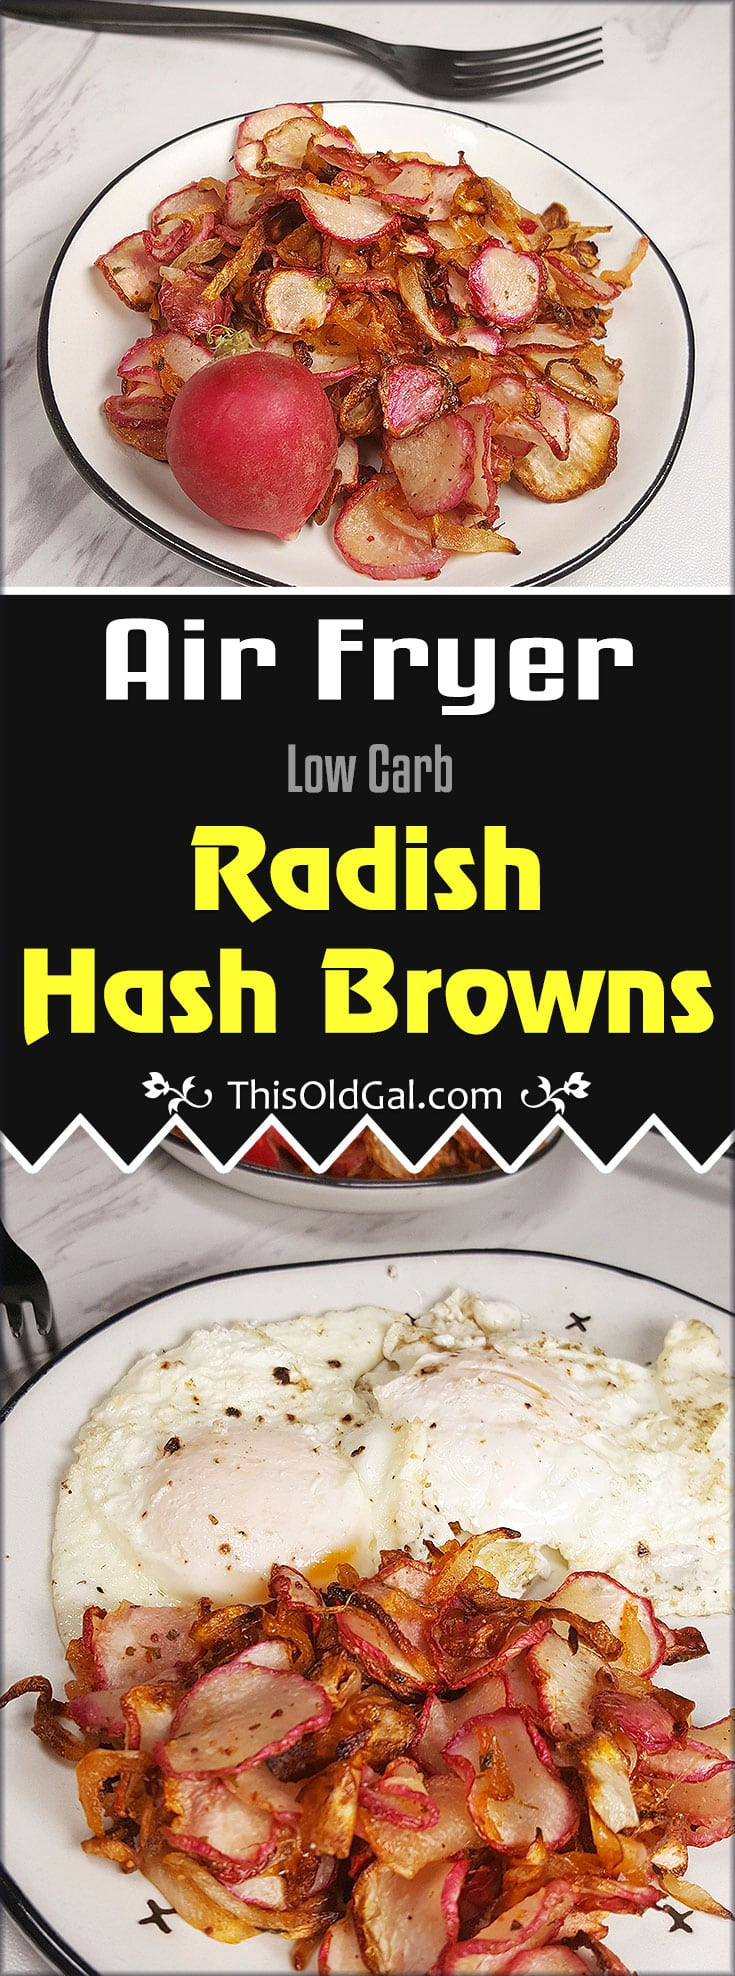 Low Carb Air Fryer Recipes
 Low Carb Air Fryer Radish Hash Browns Home Fries